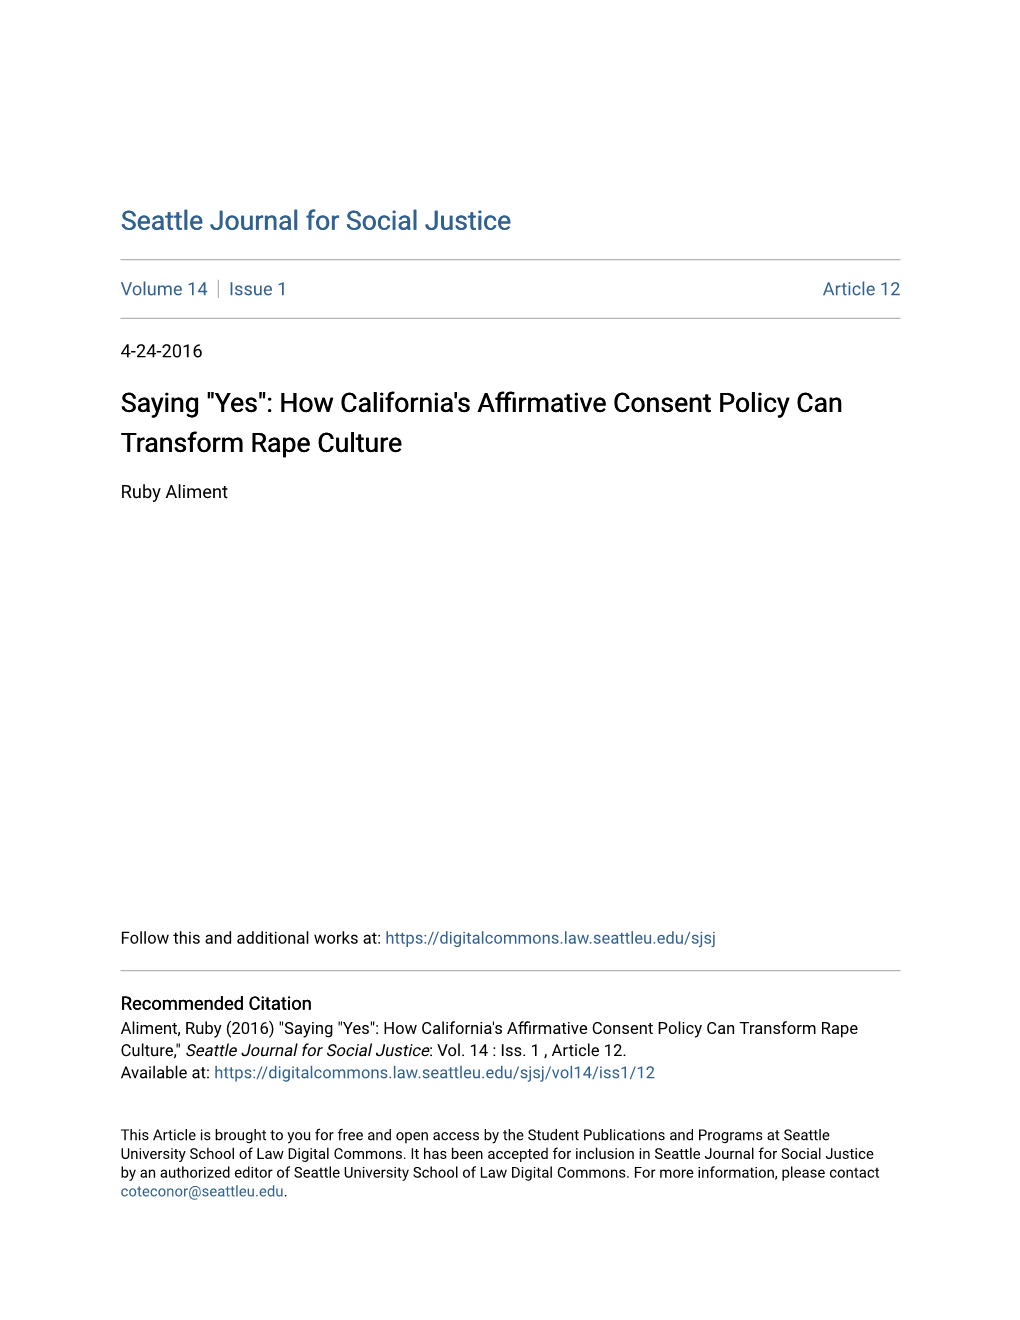 How California's Affirmative Consent Policy Can Transform Rape Culture